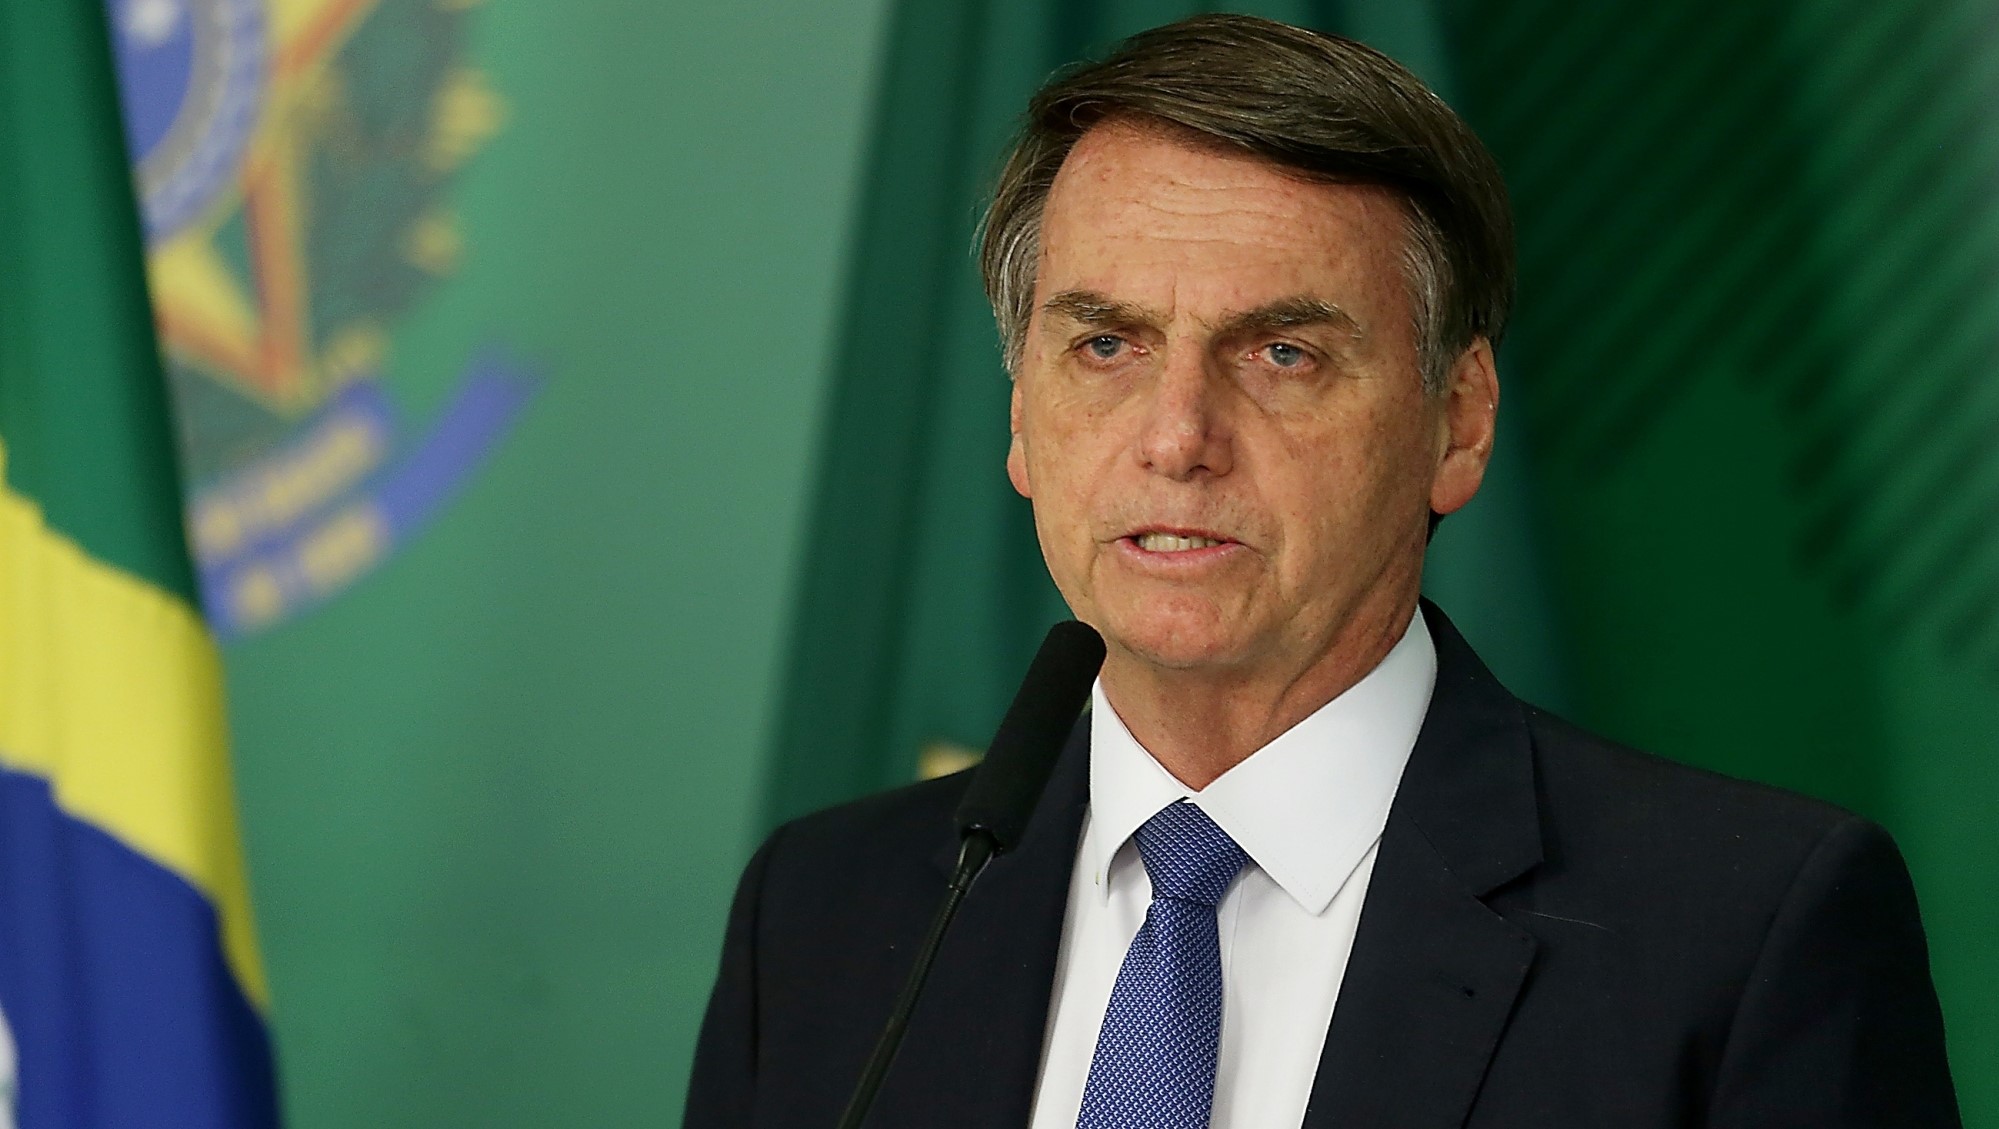 EXCLUSIVE-Brazil federal police warned against Bolsonaro arms agenda, documents show